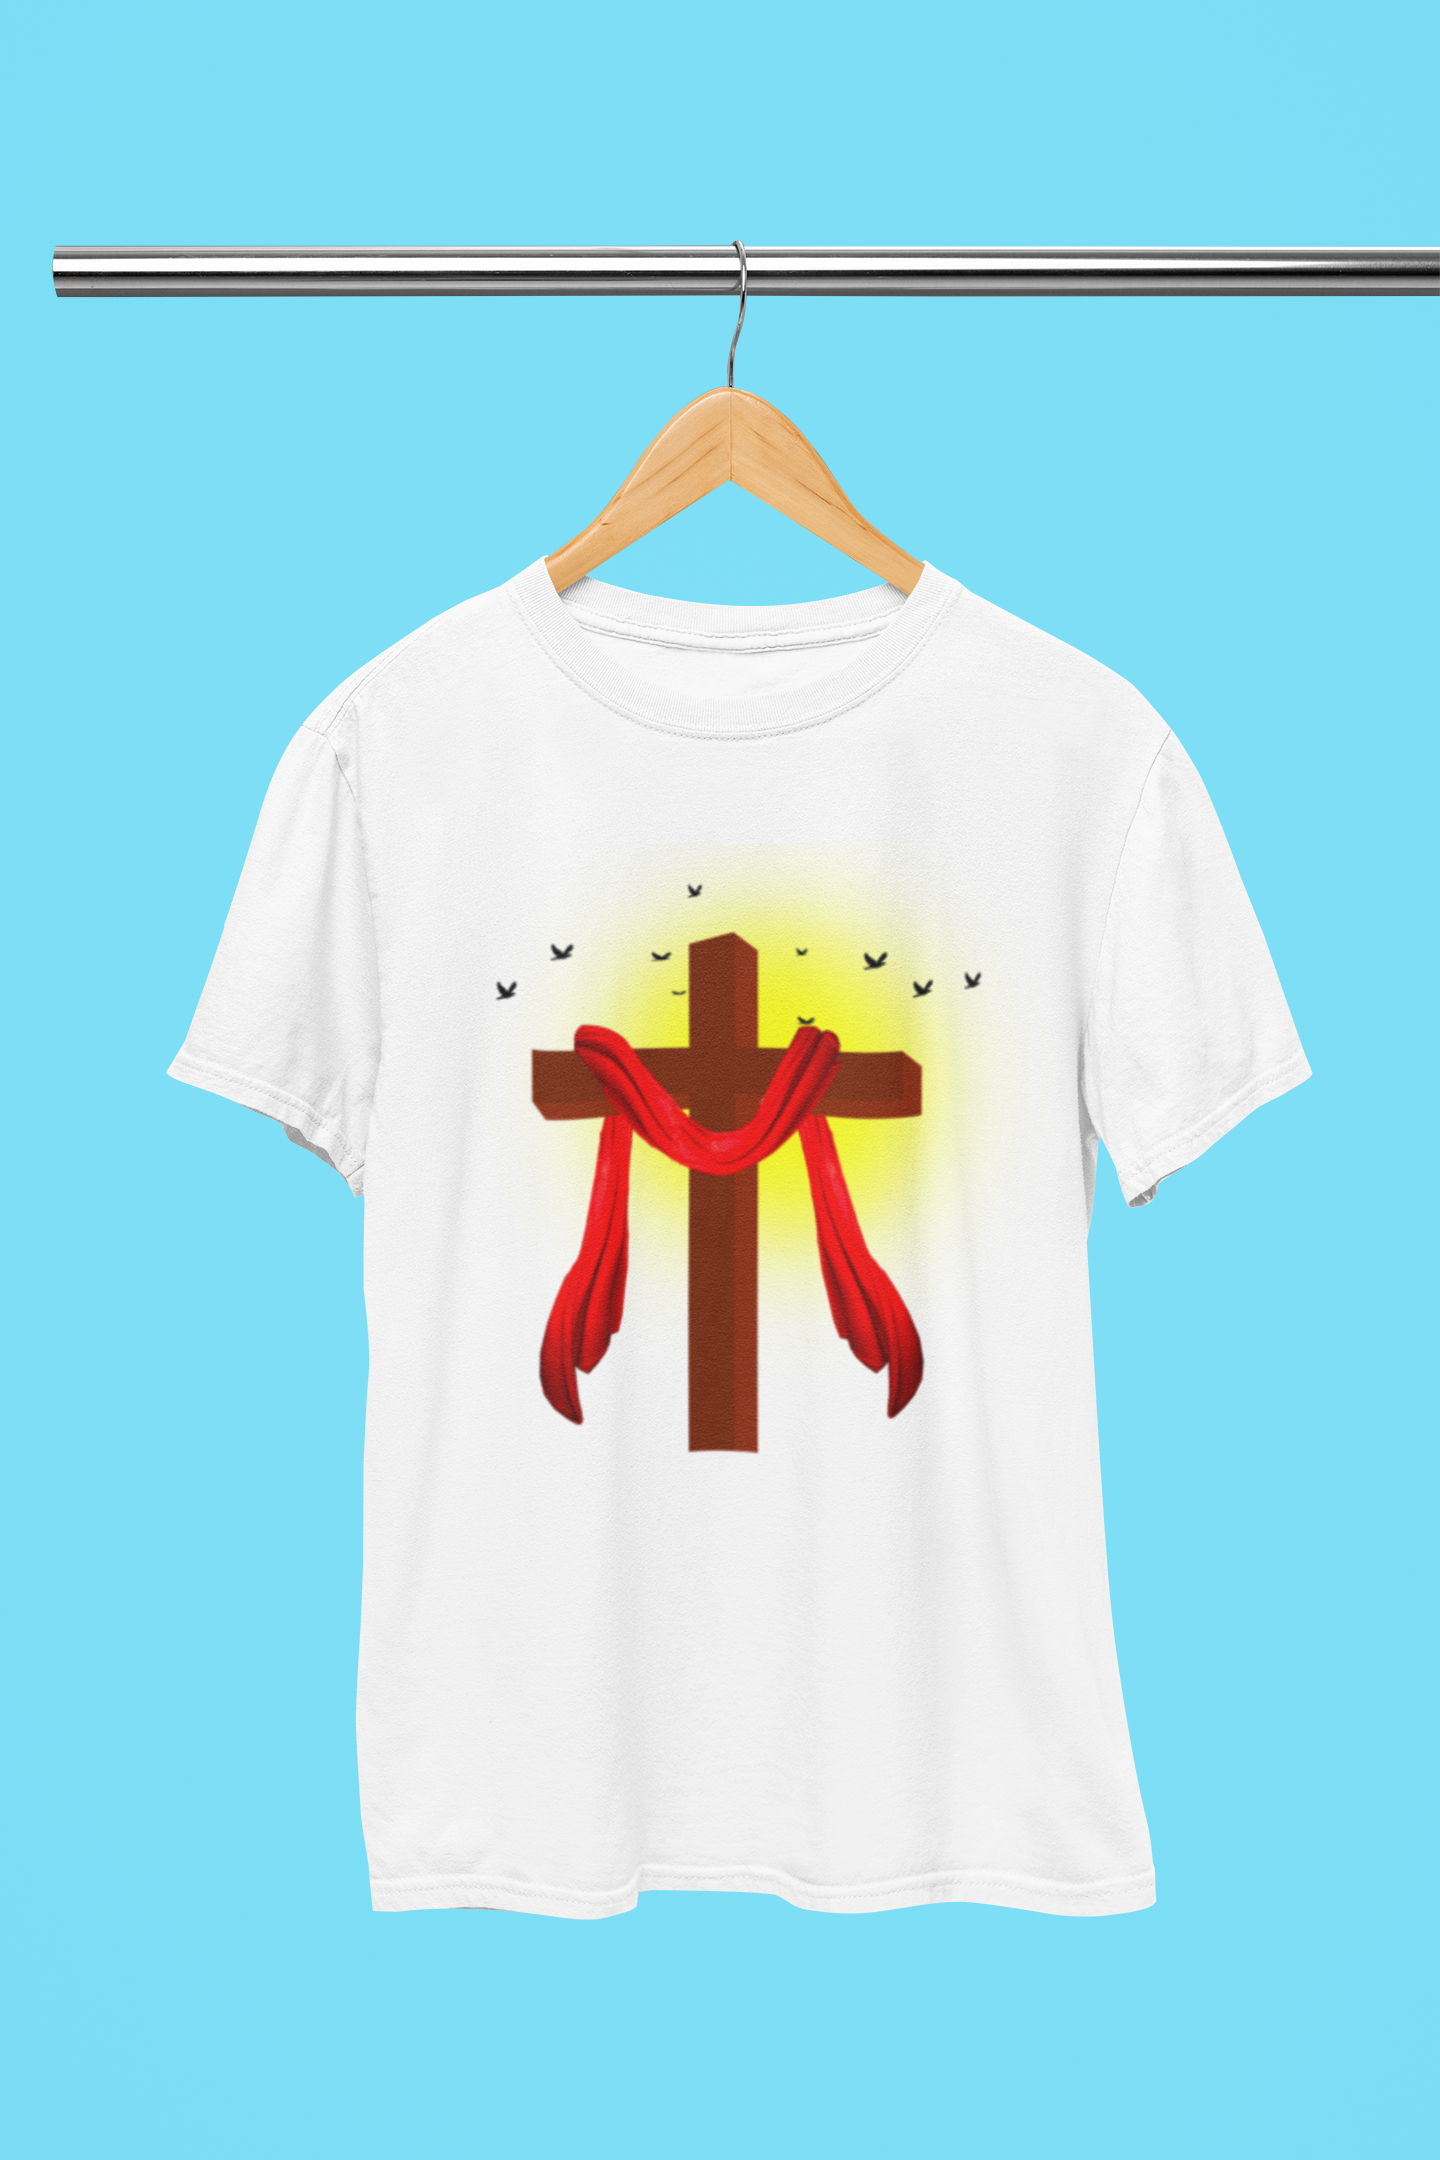 EASTER SPECIAL T-SHIRT